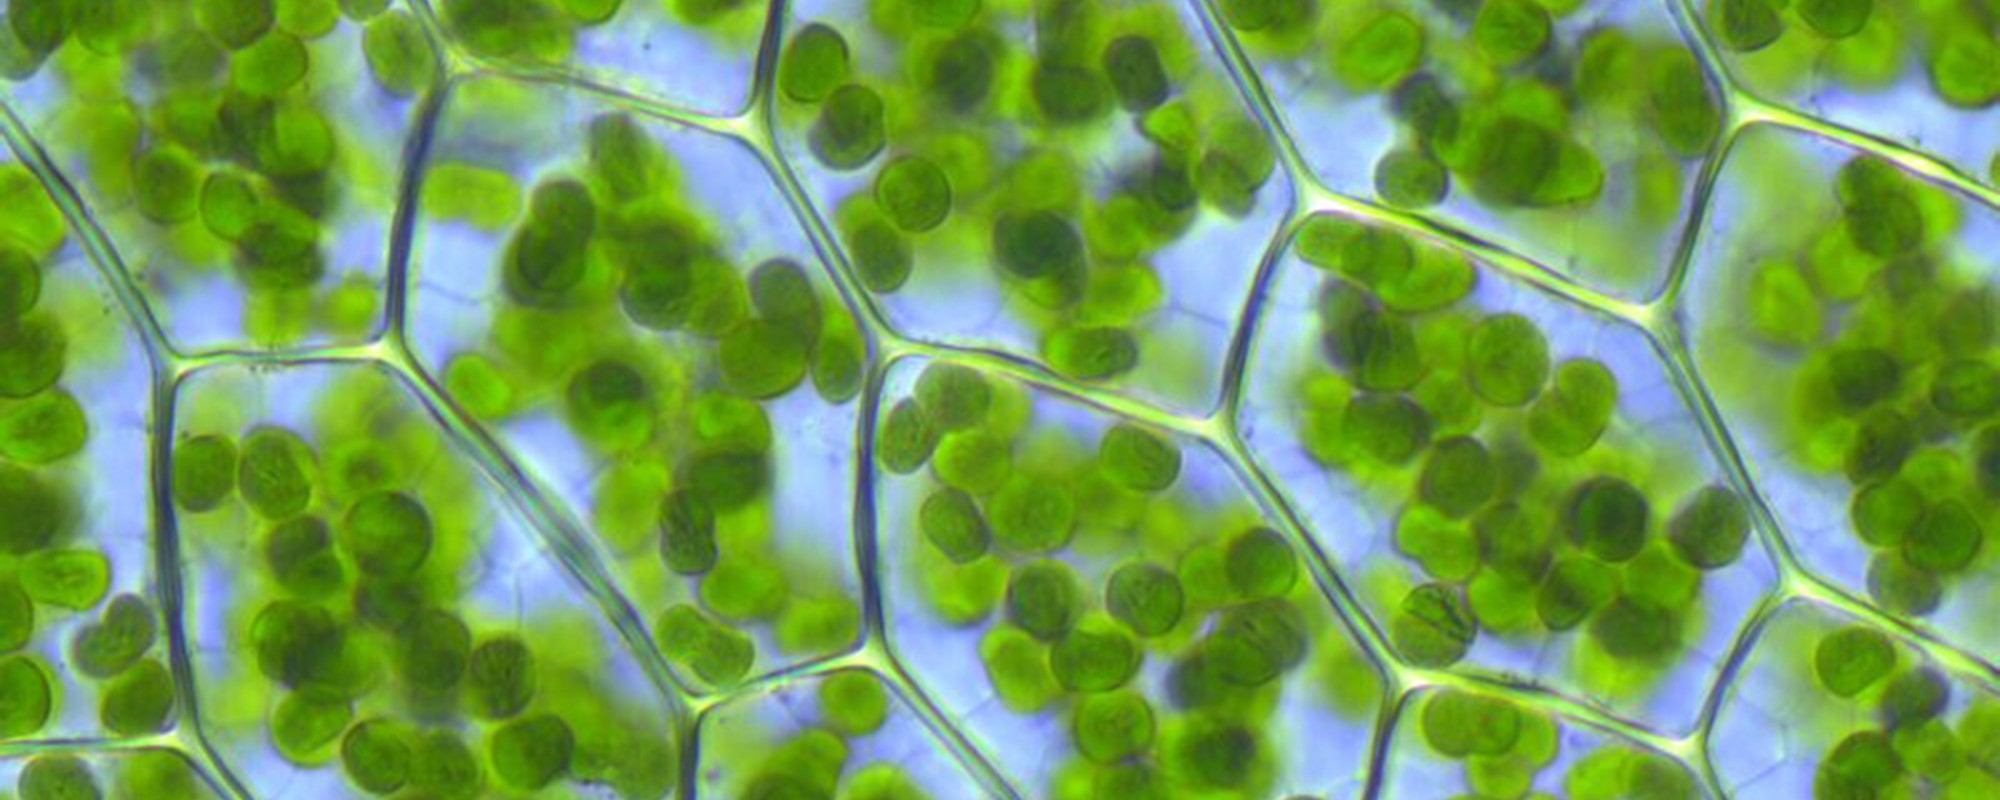 Close-up view of the cells of a plant.